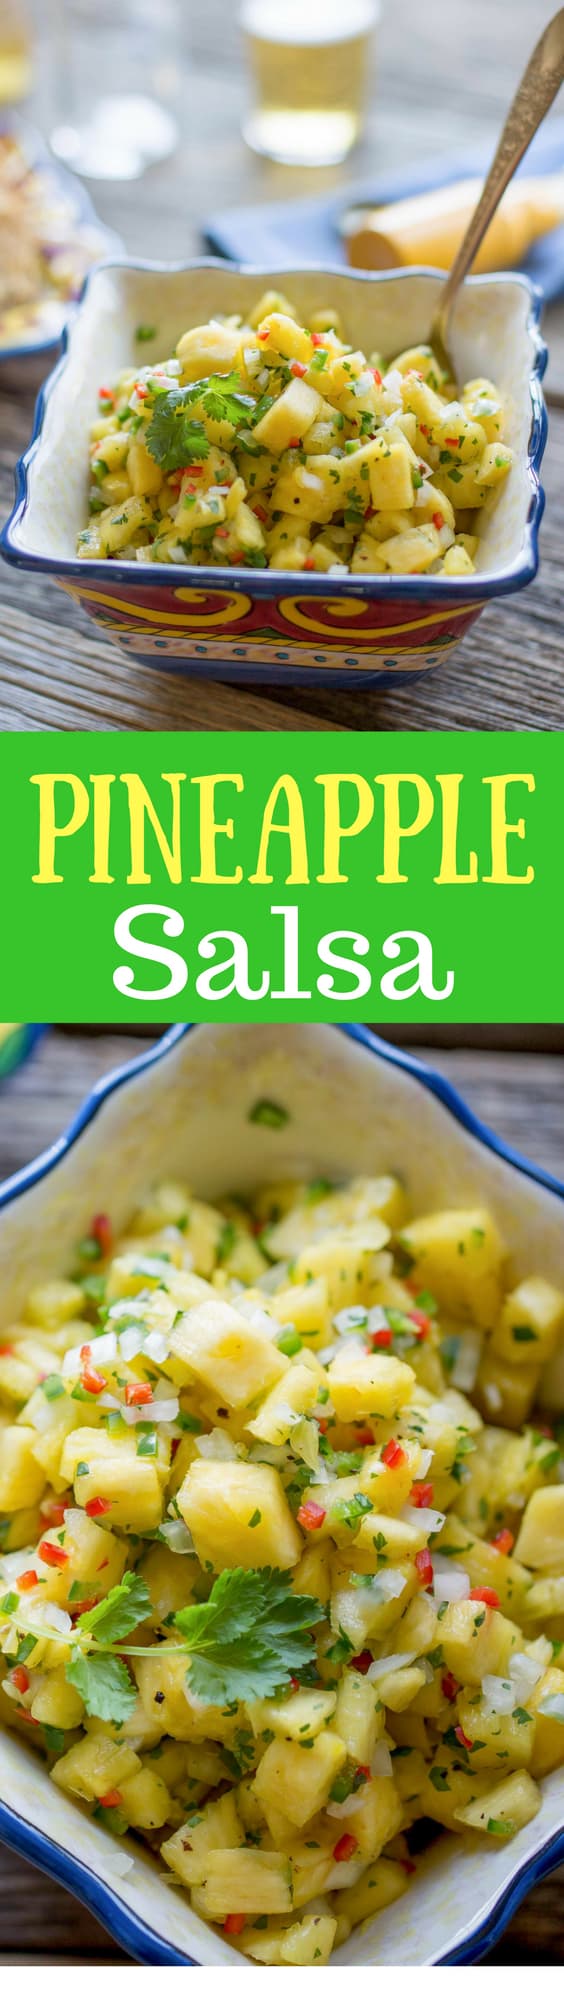 Easy & Fresh Pineapple Salsa - A wonderfully easy salsa that is great on tacos, grilled chicken, burritos or with a bag of chips.  www.savingdessert.com